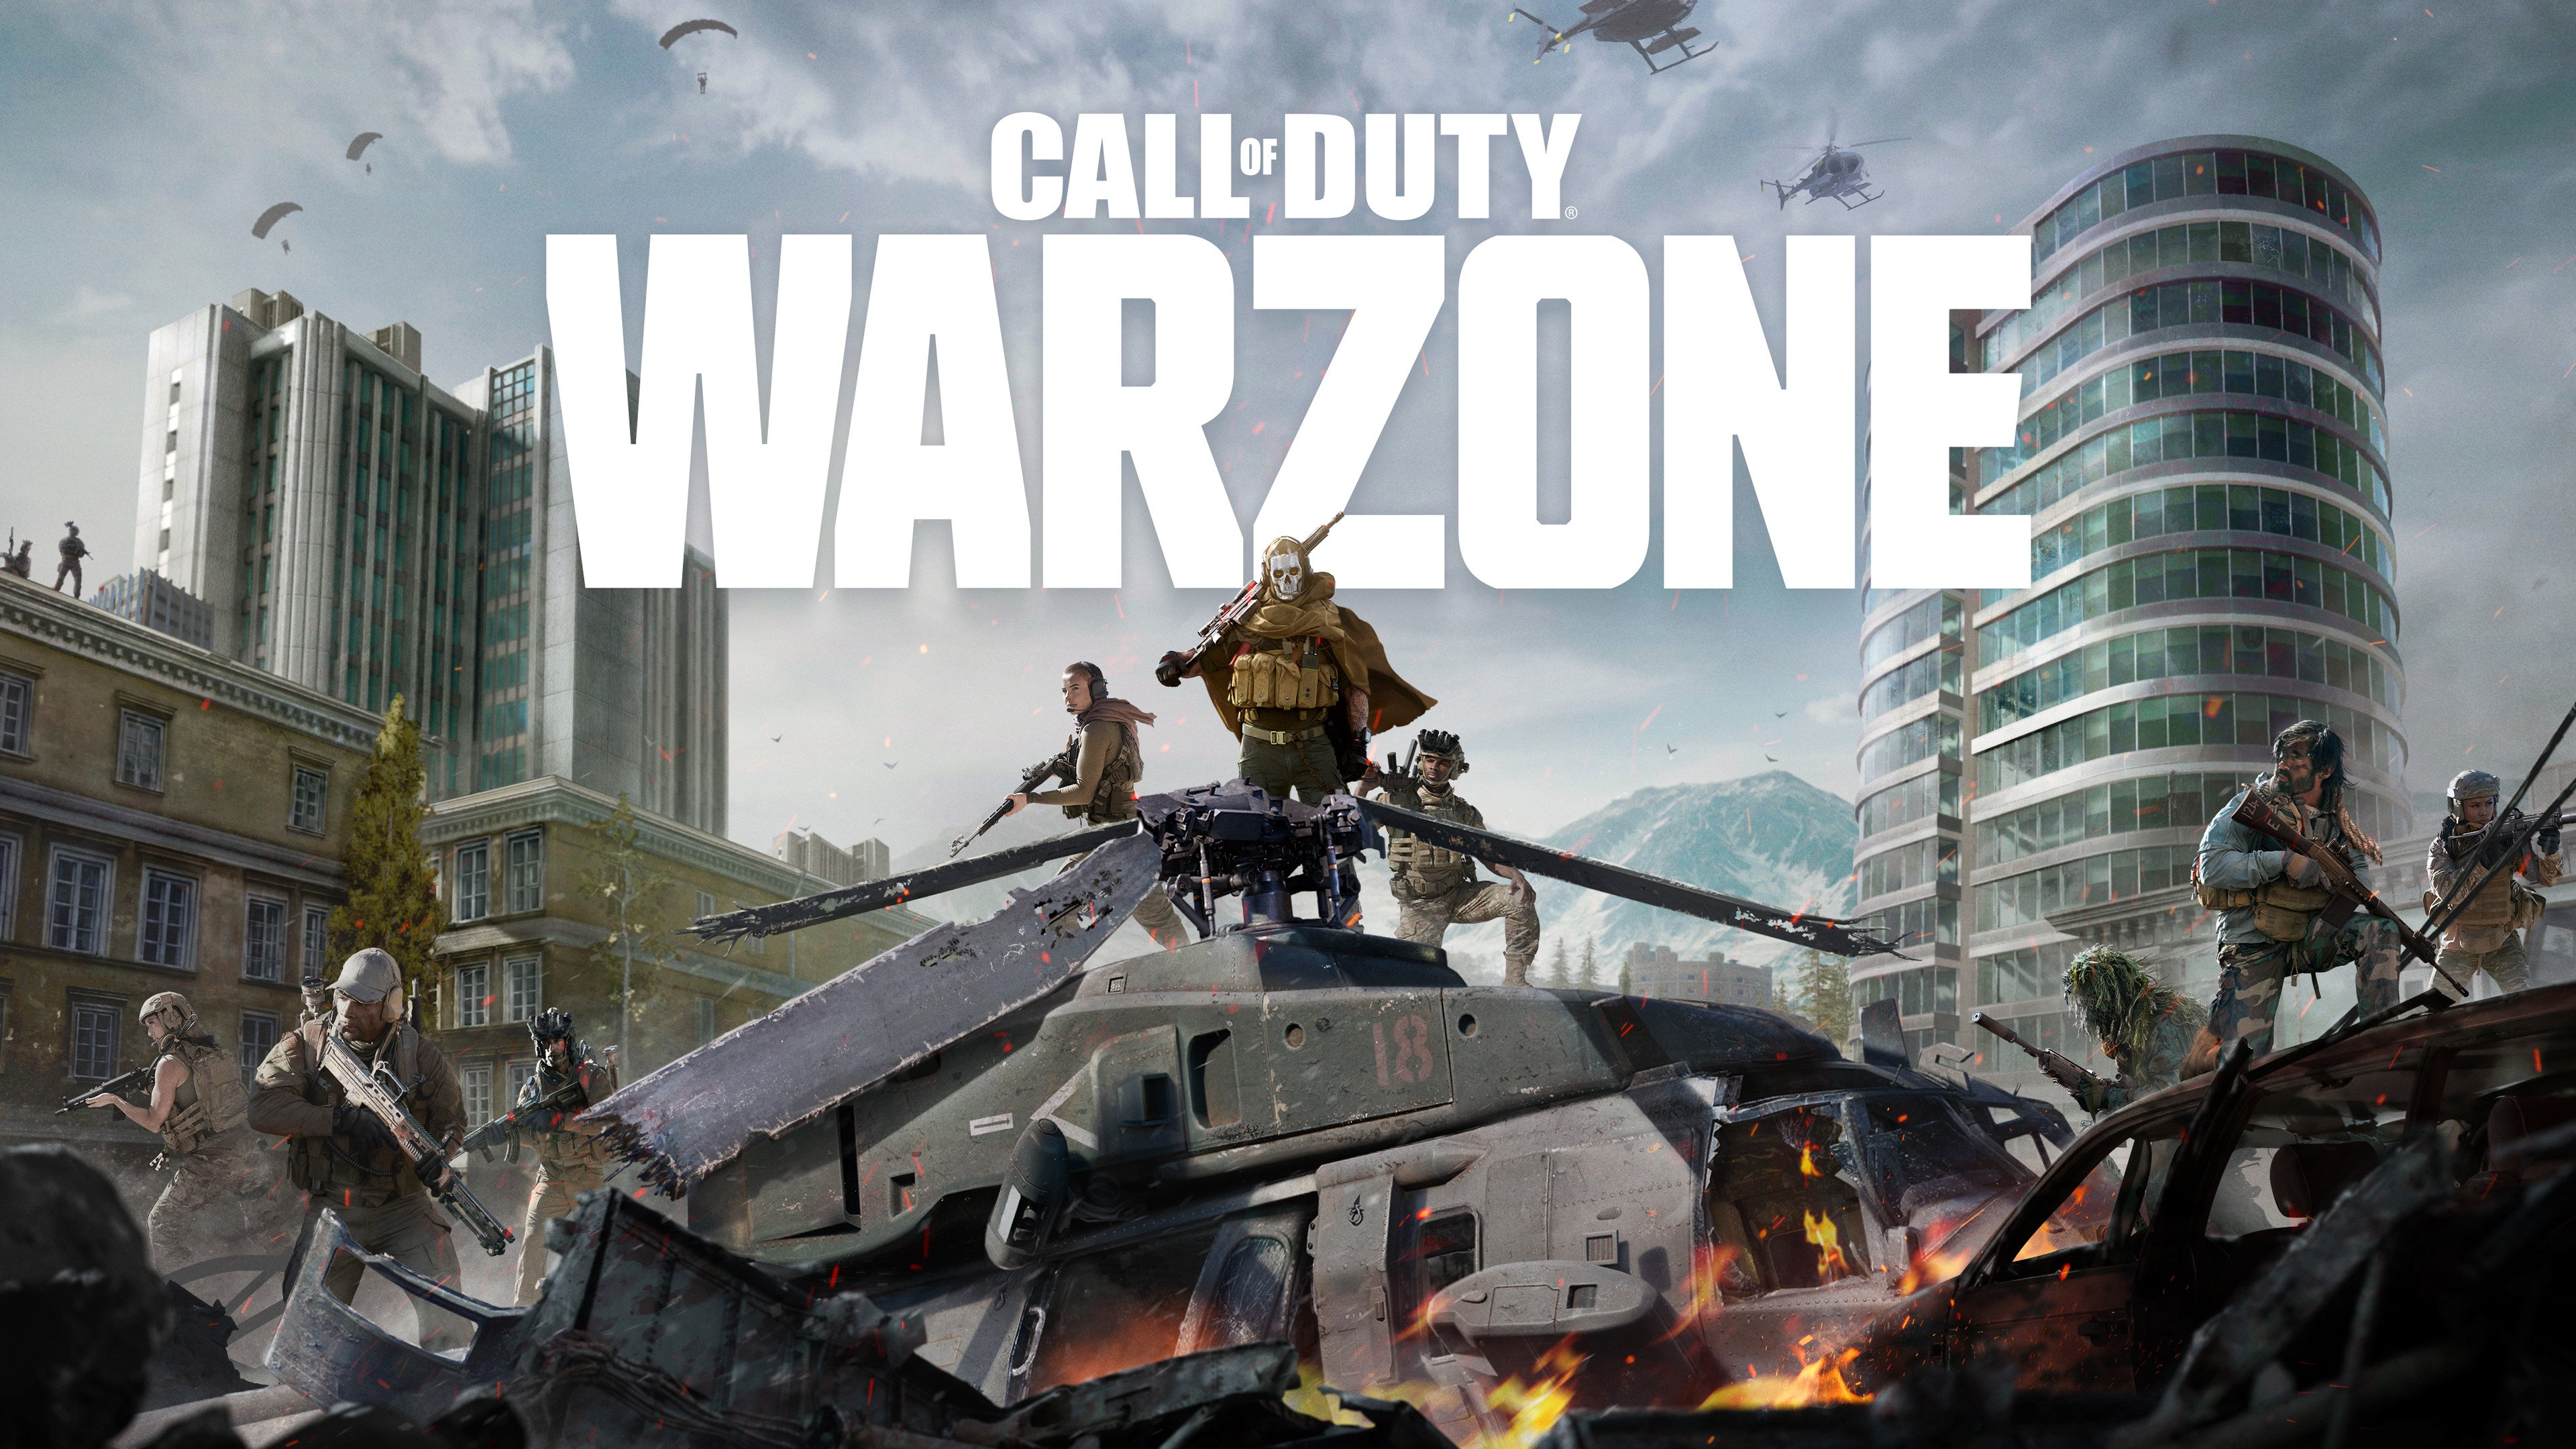 Wallpaper Call of Duty Warzone Logo Cover